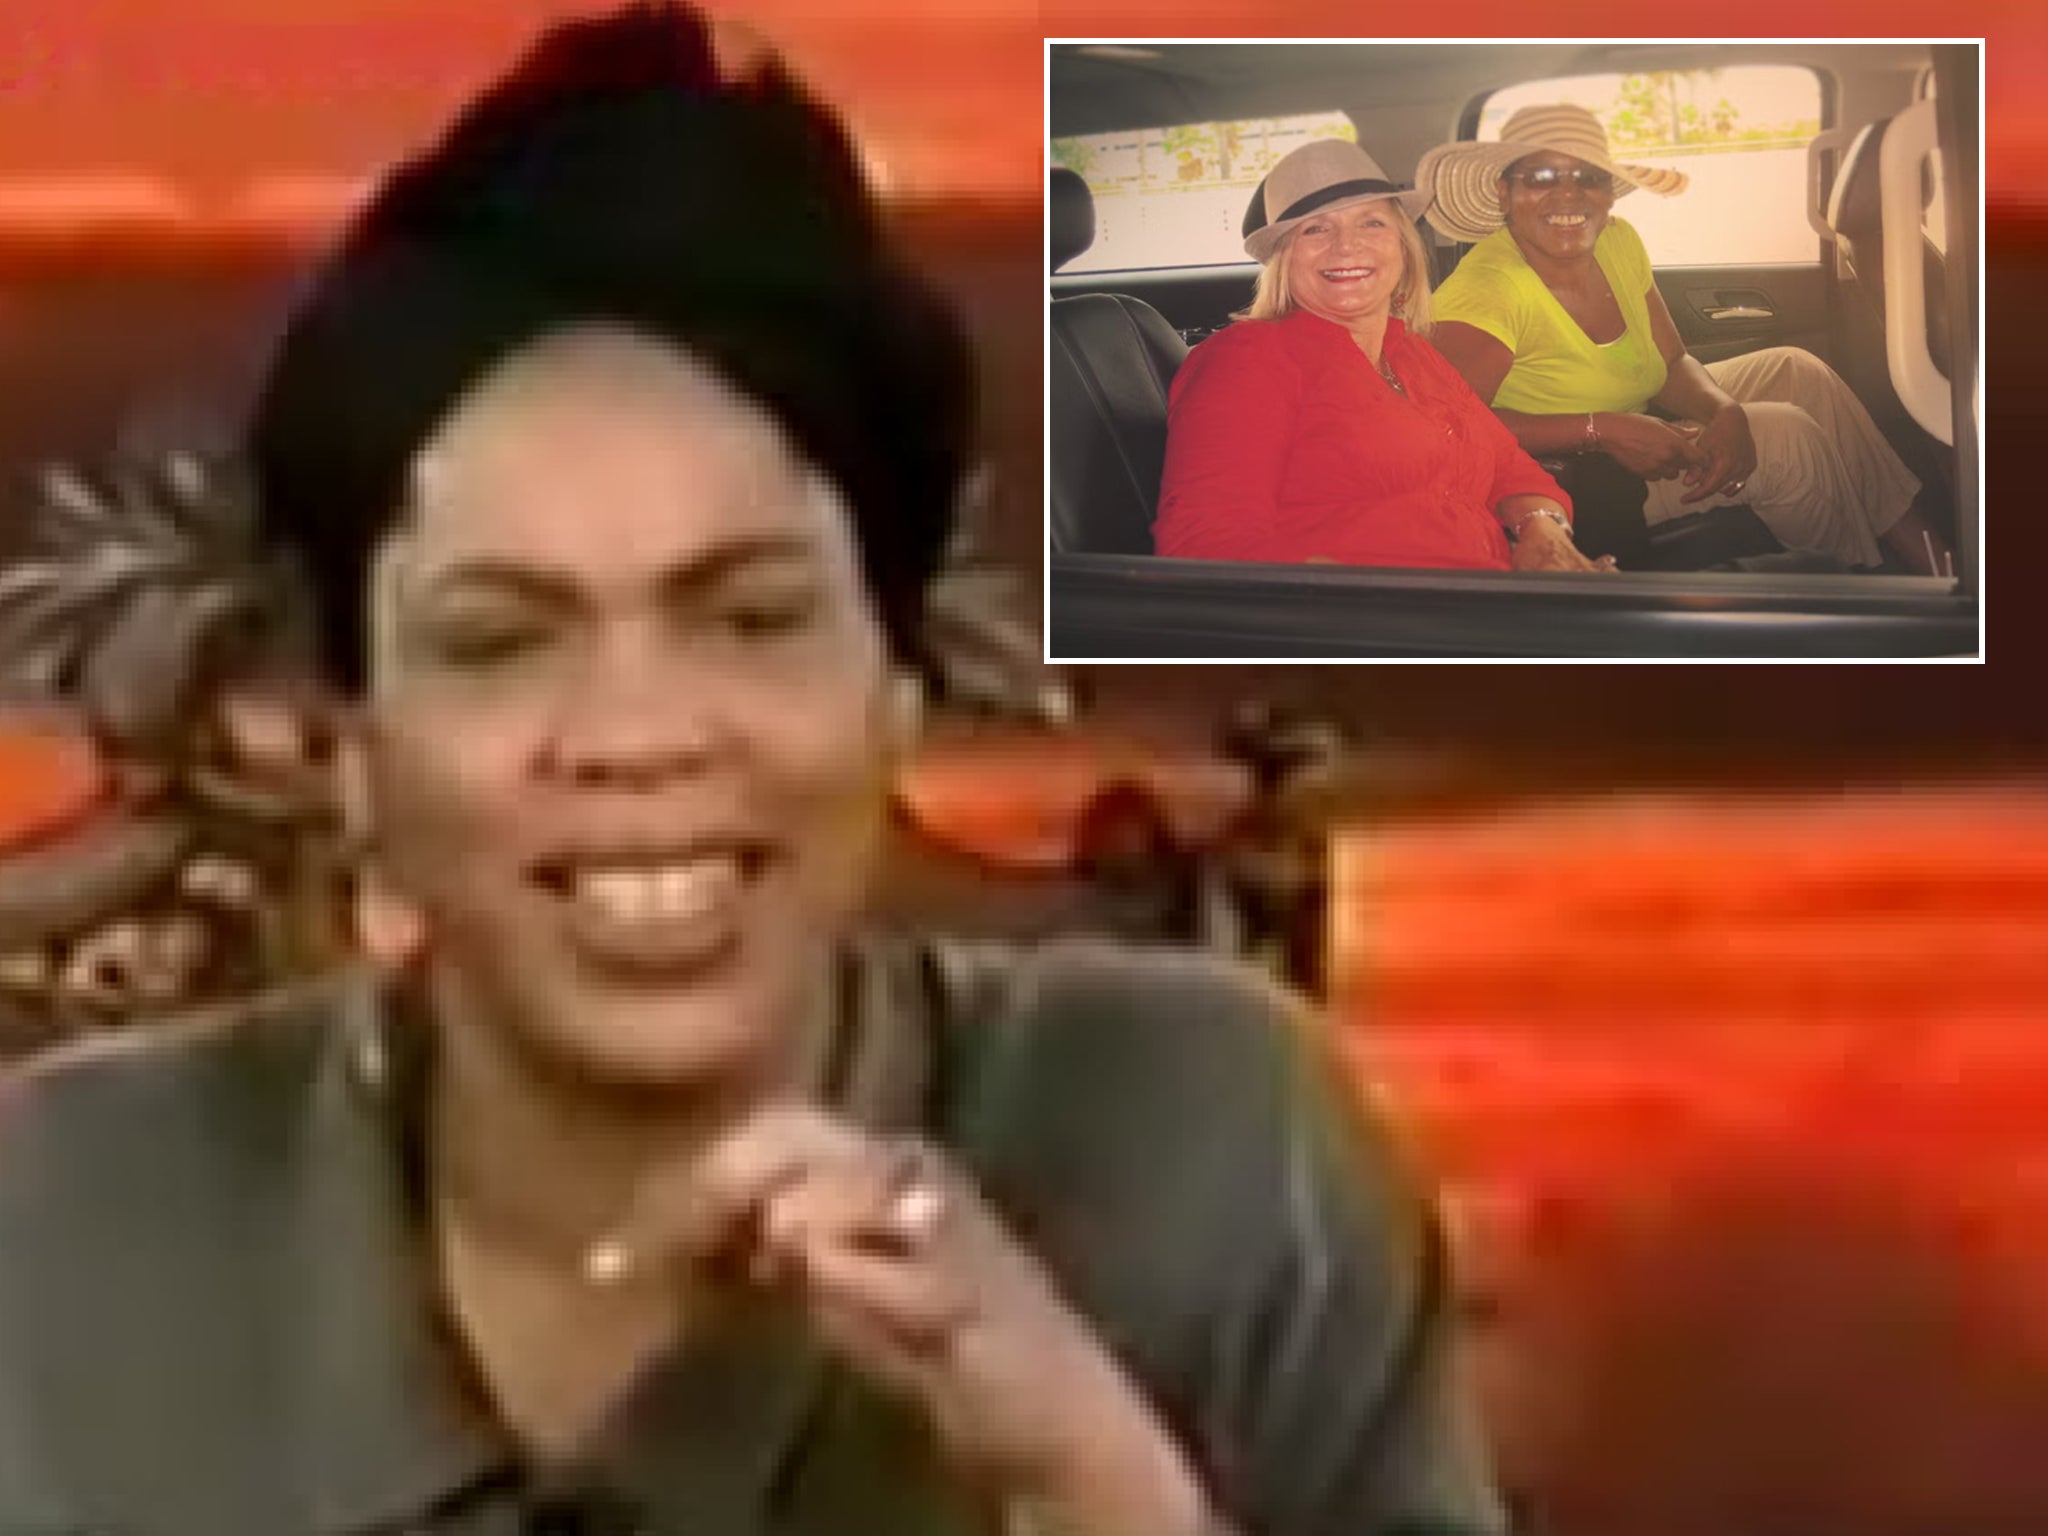 Miss Cleo, real name Youree Dell Harris, was a ubiquitous presence on 90s late-night television